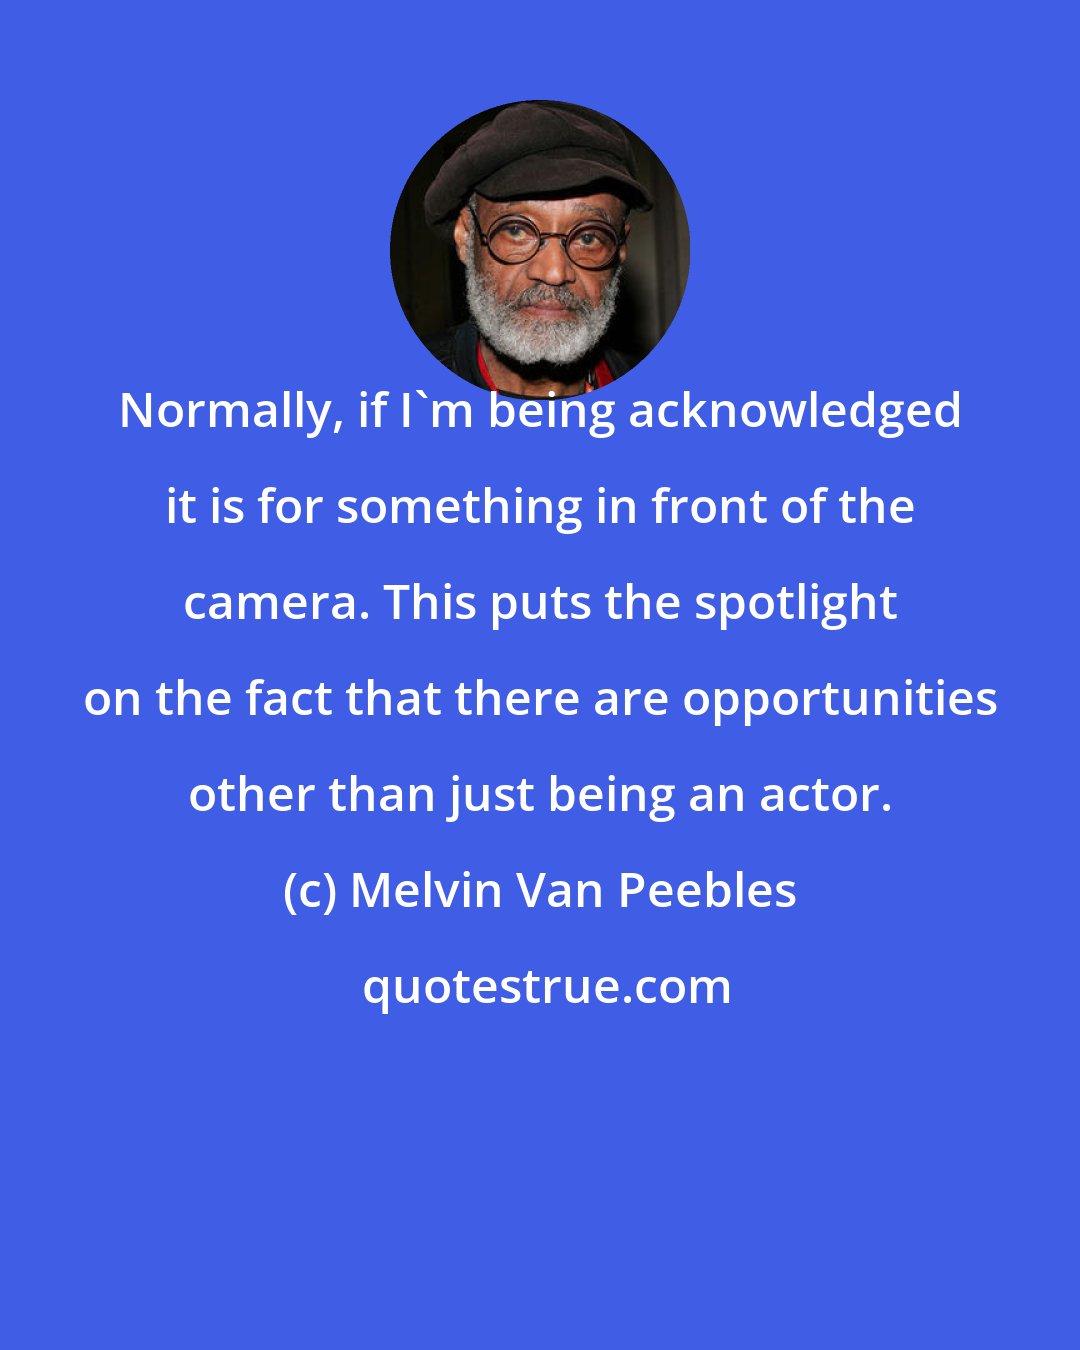 Melvin Van Peebles: Normally, if I'm being acknowledged it is for something in front of the camera. This puts the spotlight on the fact that there are opportunities other than just being an actor.